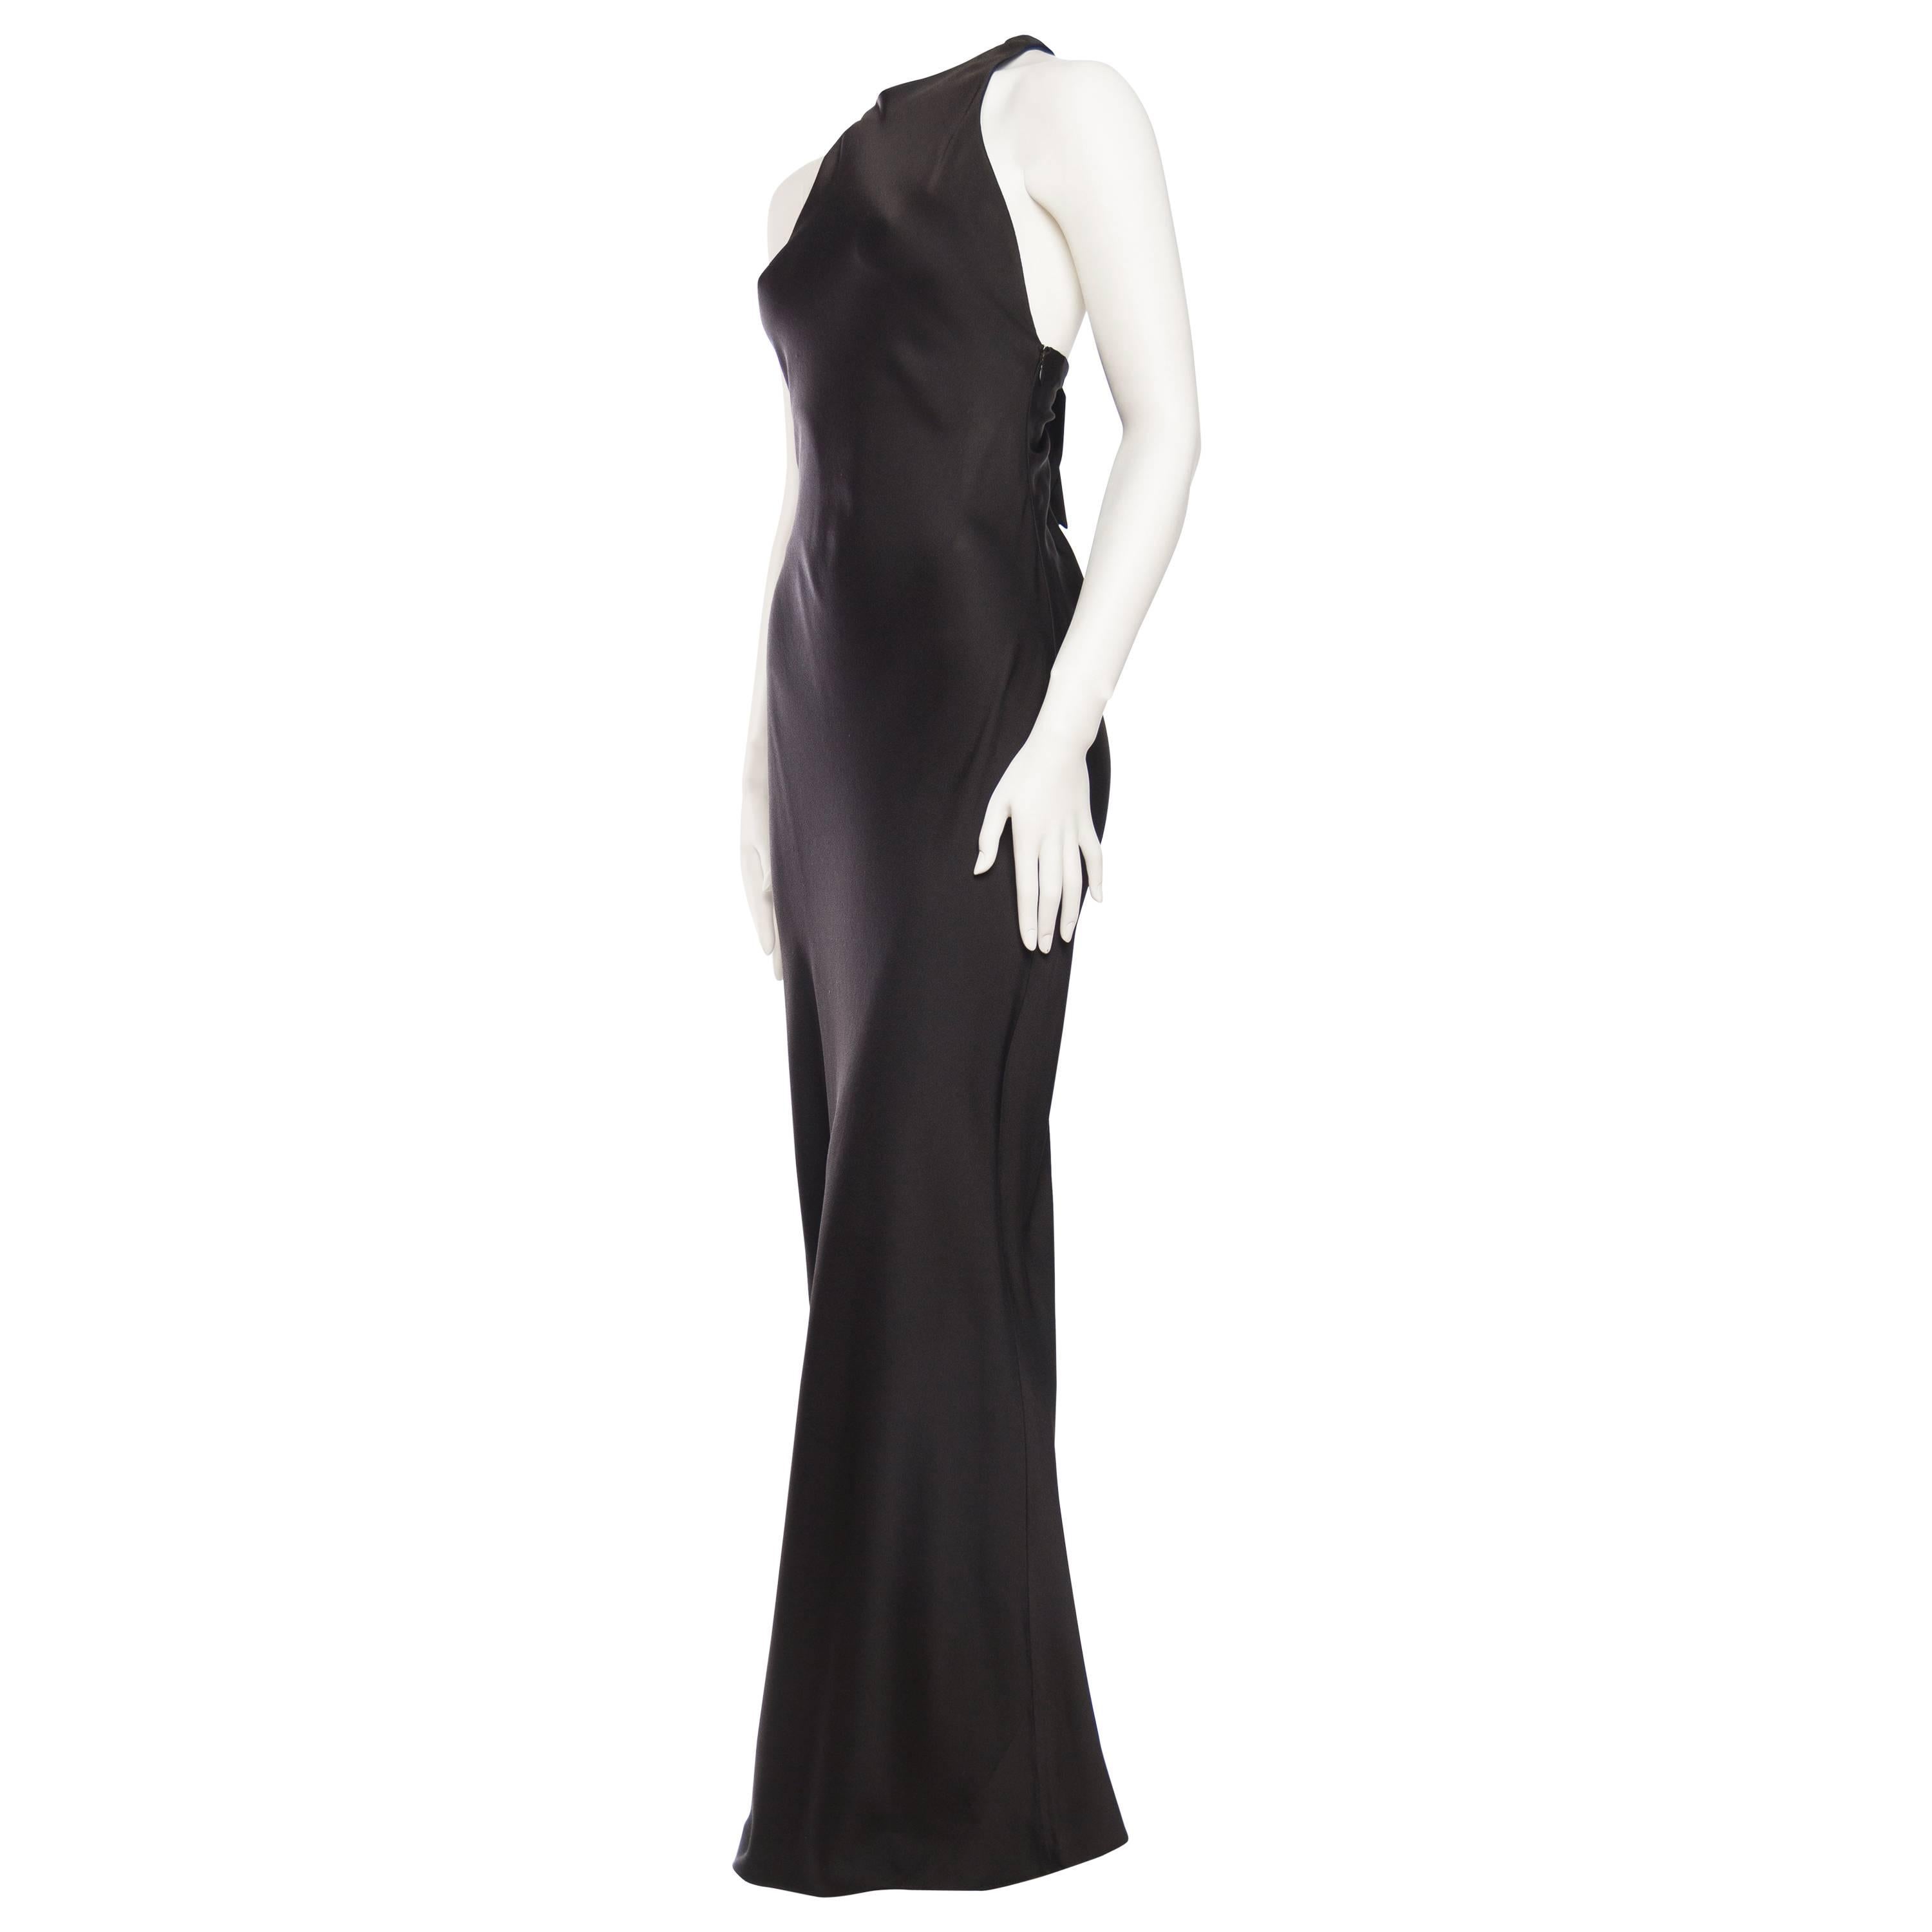 Yves Saint Laurent Bias Cut Gown with Cut-out Back. 